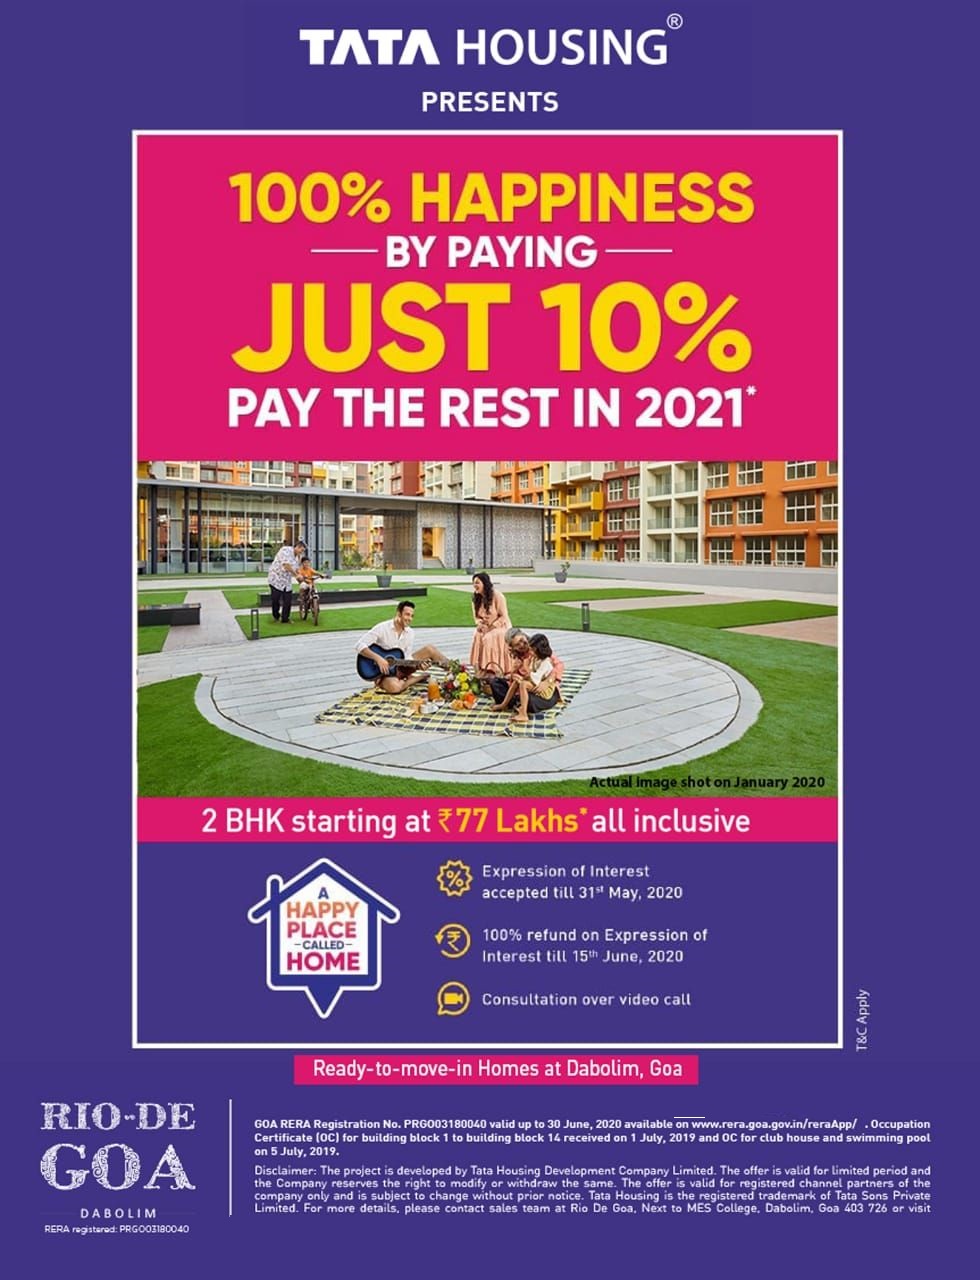 Pay just 10% now and the rest in 2021 at Tata Rio De Goa in Dabolim, Goa Update